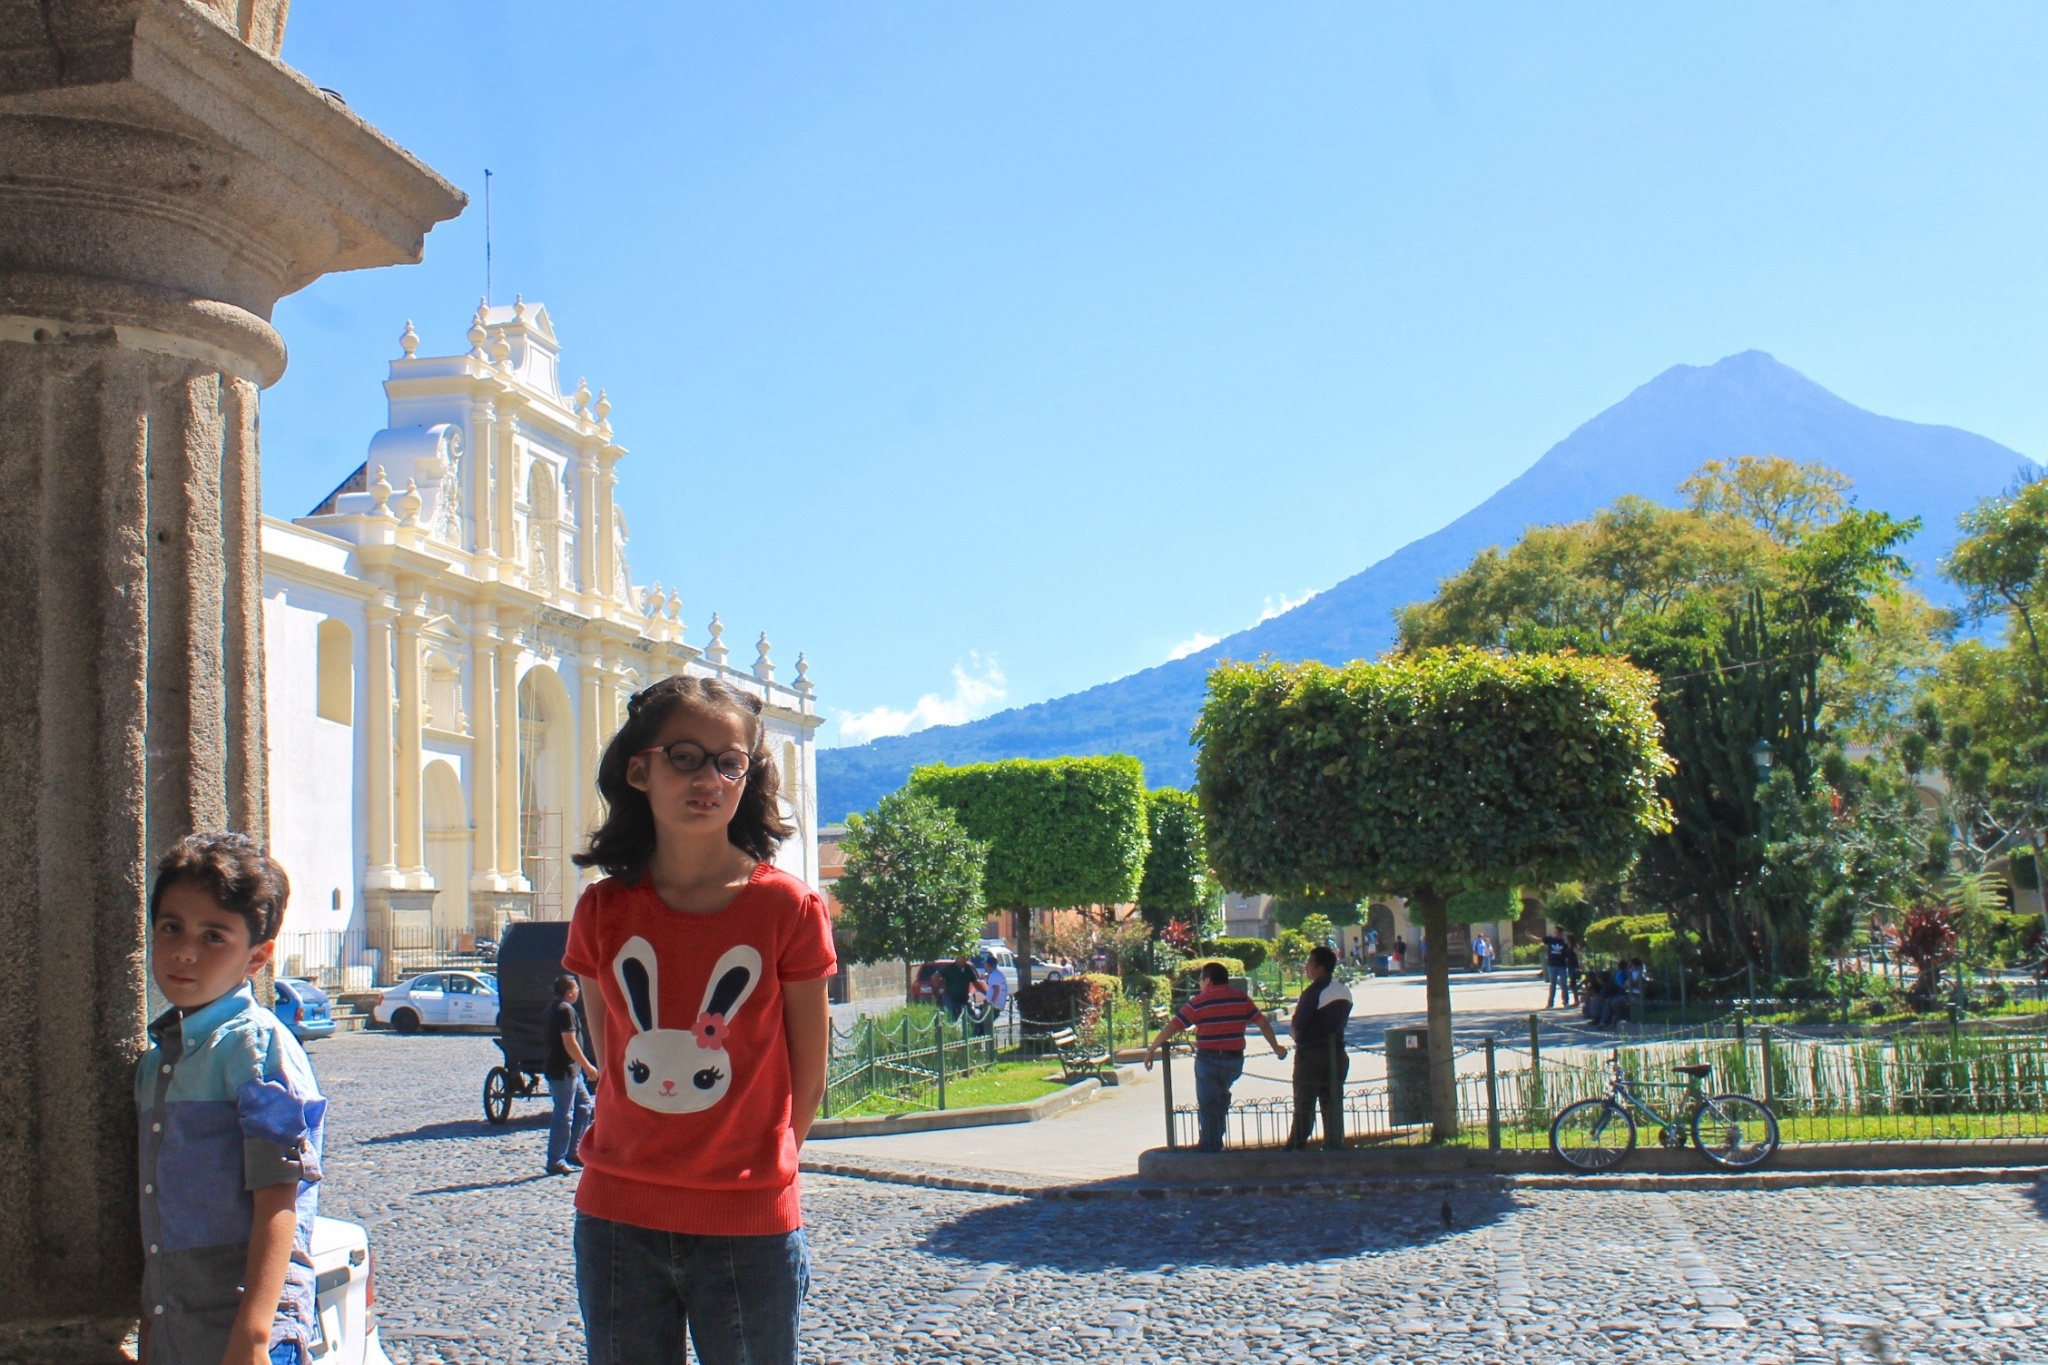 Antigua Guatemala, view of the Catedral and the Parque Central